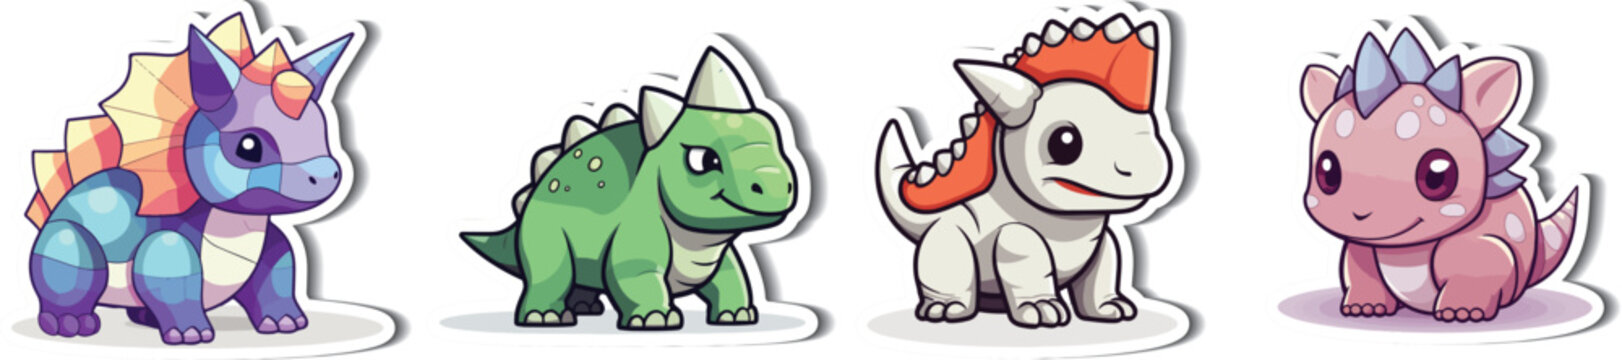 Cute Dino Cartoon Sticker in Vector. Explore the jurassic world with our adorable Triceratops cartoon sticker! Perfect for crafting, this vector illustration brings prehistoric charm to your projects.